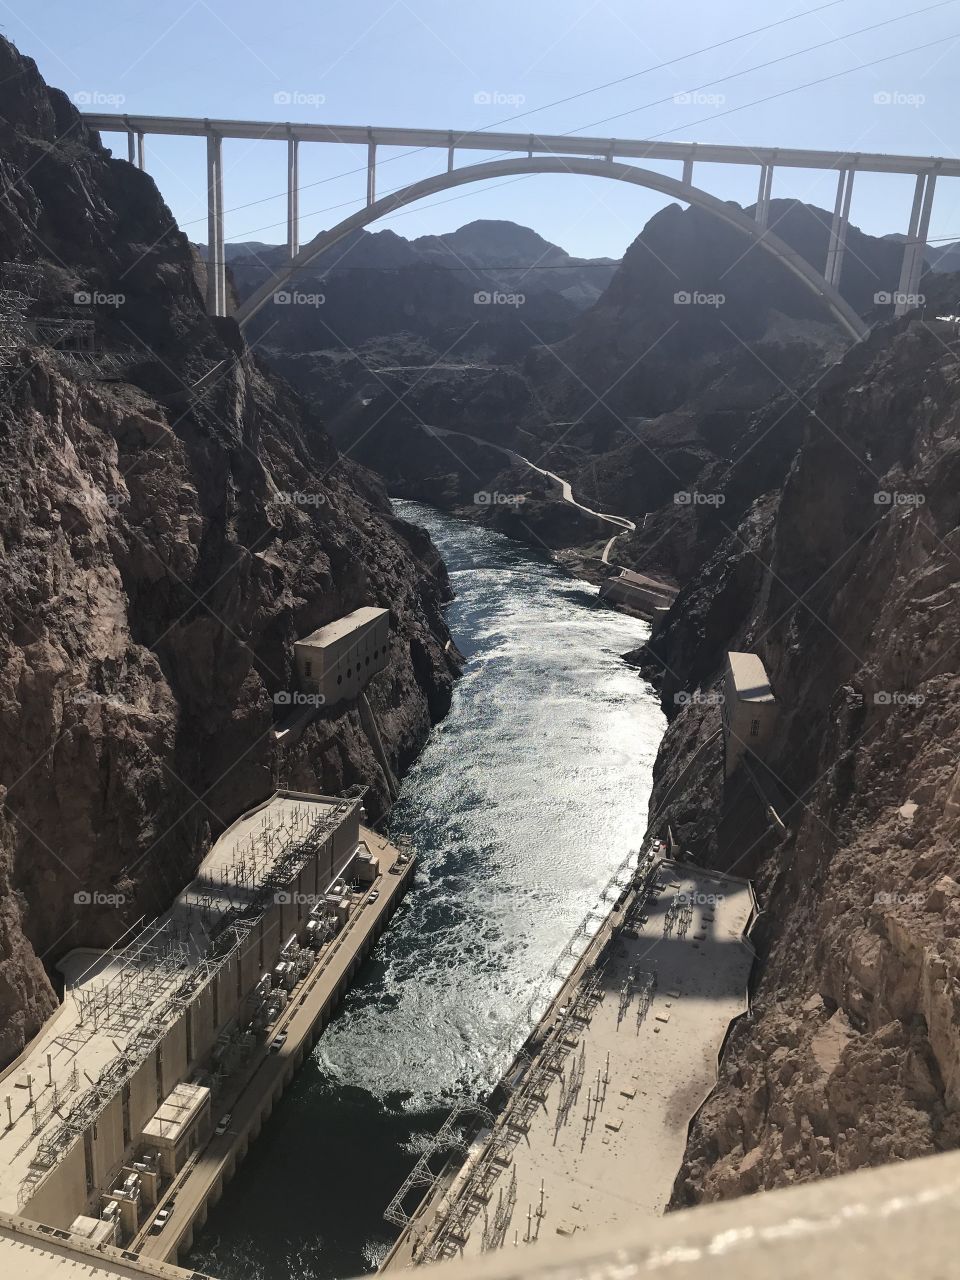 View of the Hover Dam from above. Taken in March 2018.